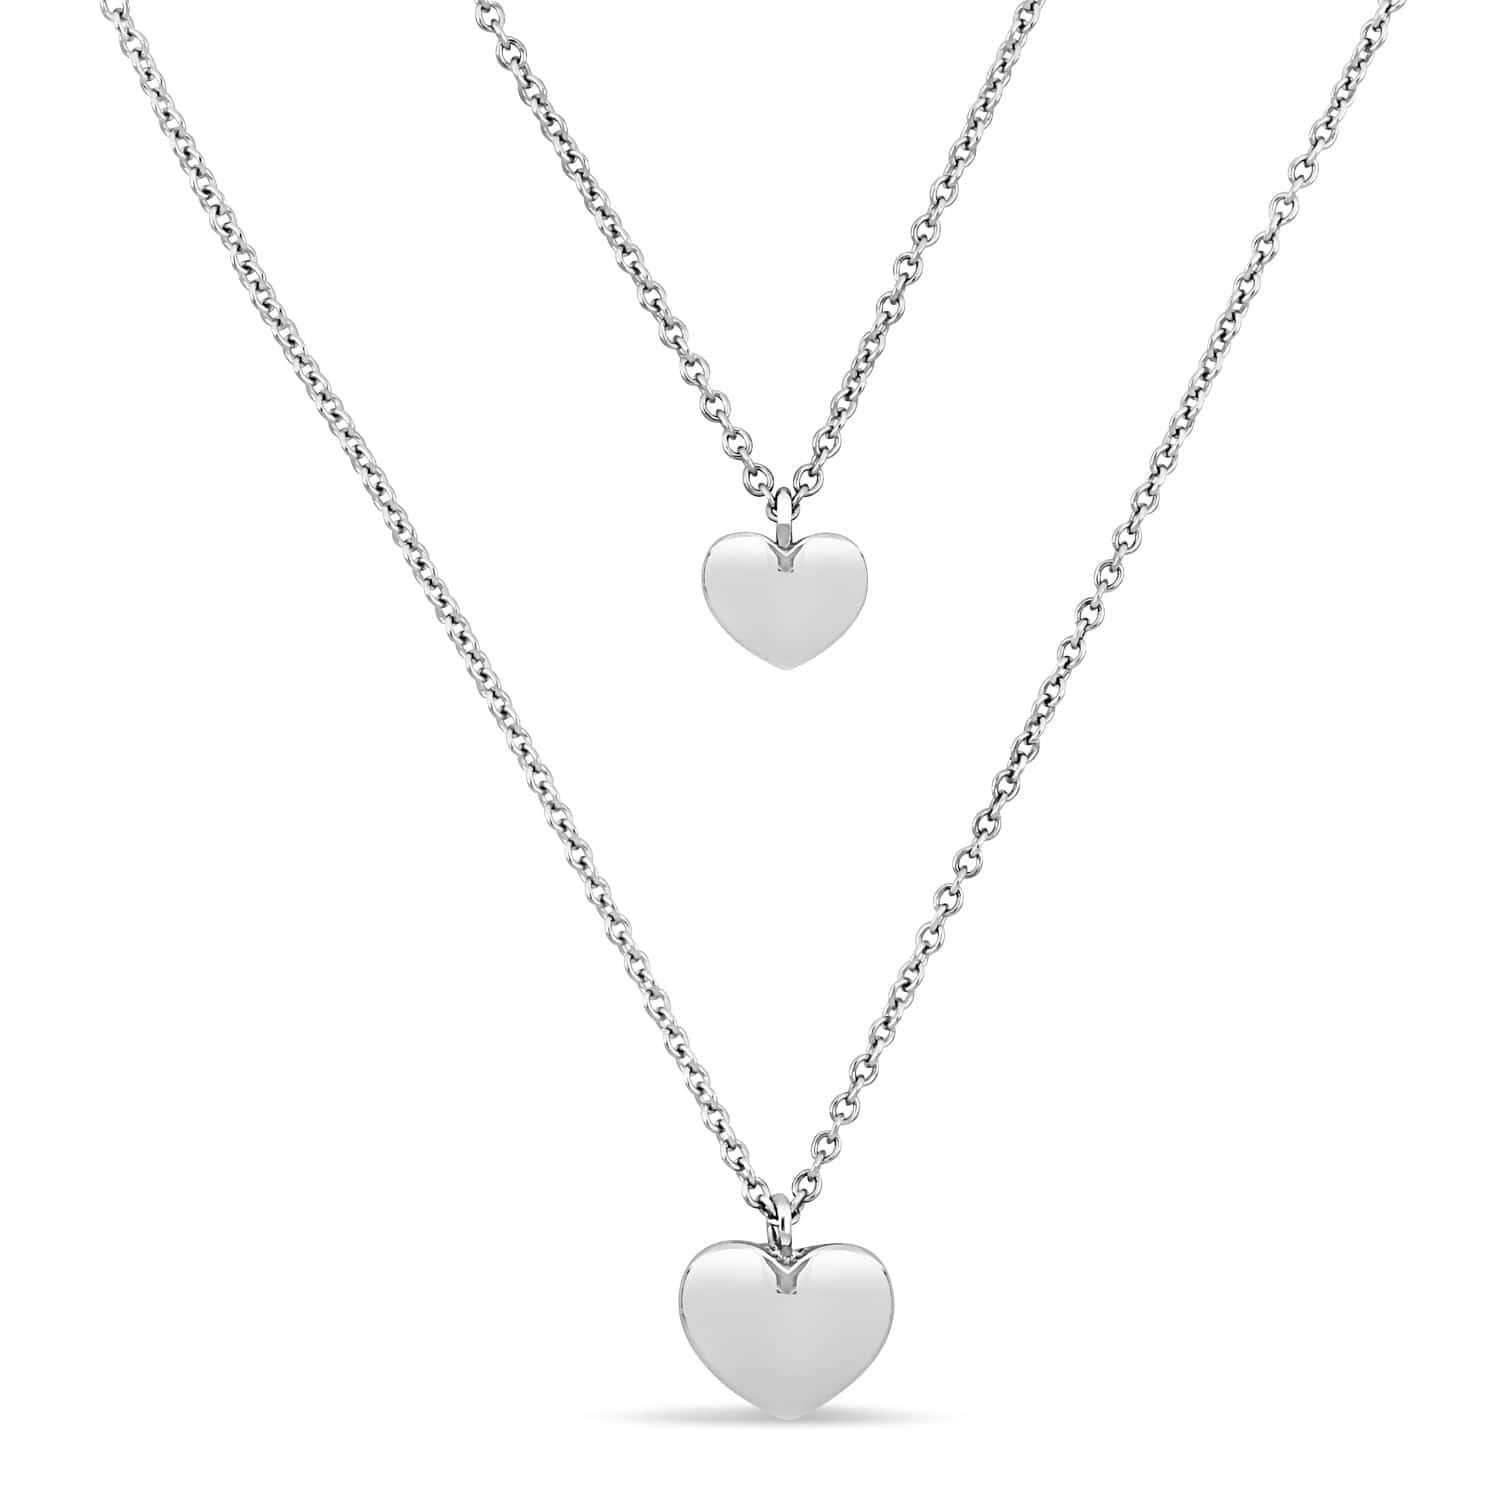 Double Heart Necklace 18k White Gold